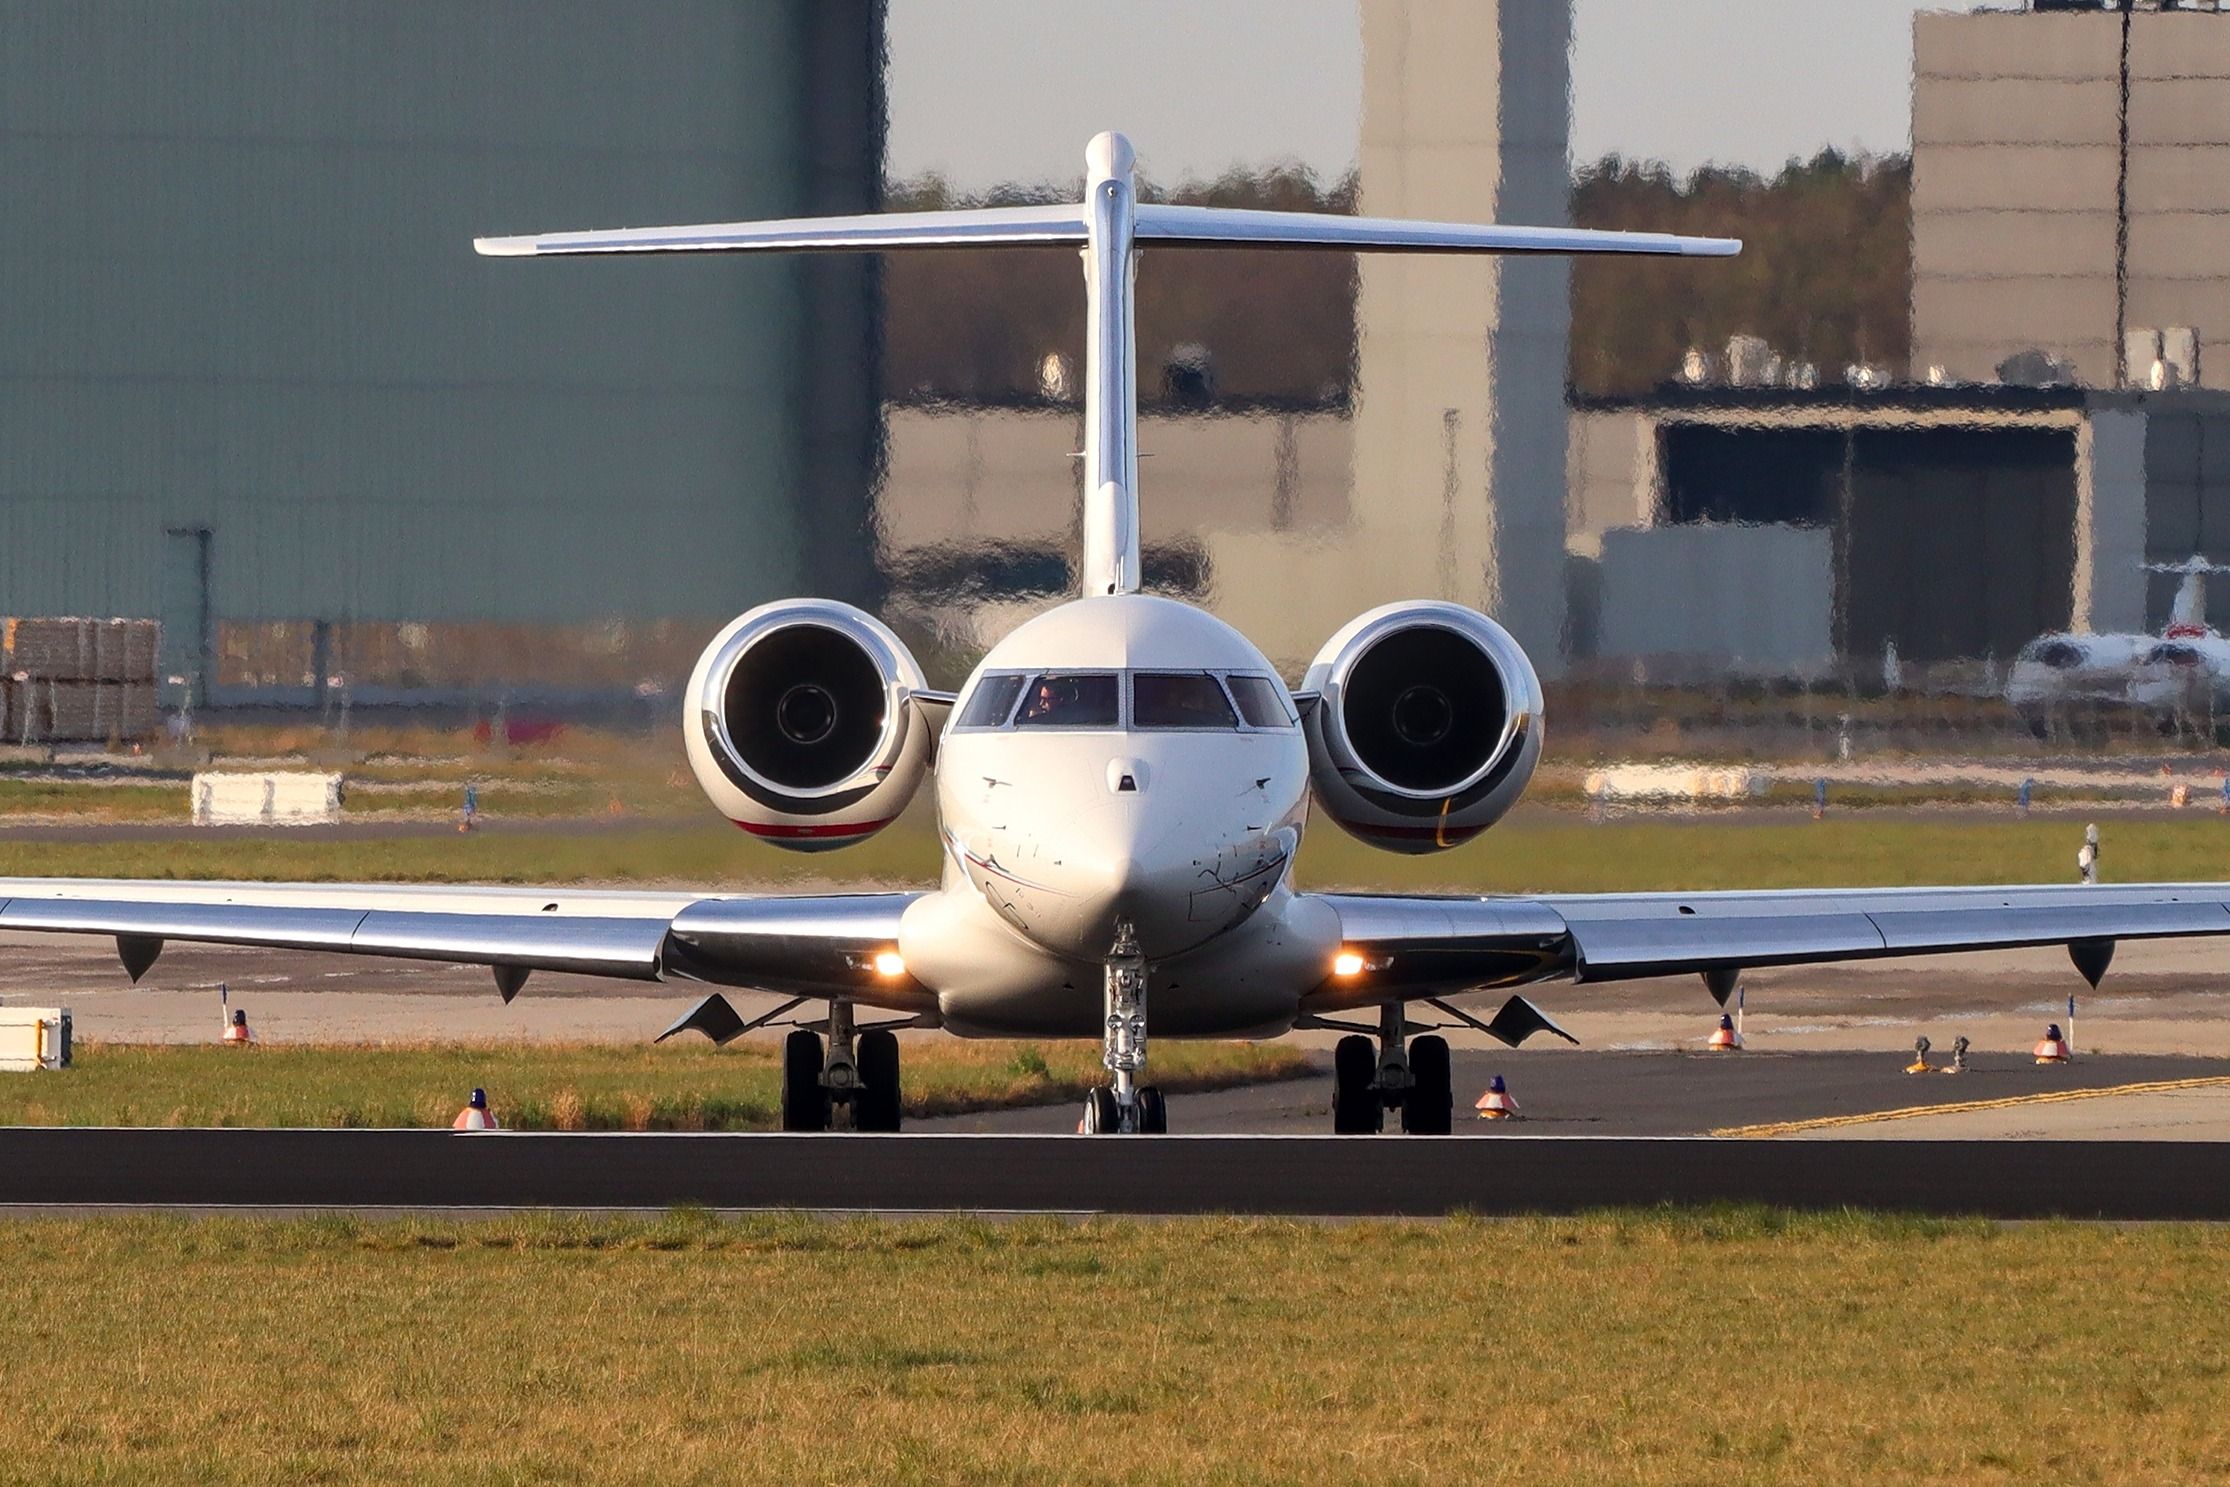 A Bombardier Global Express 7500 on an airport apron.